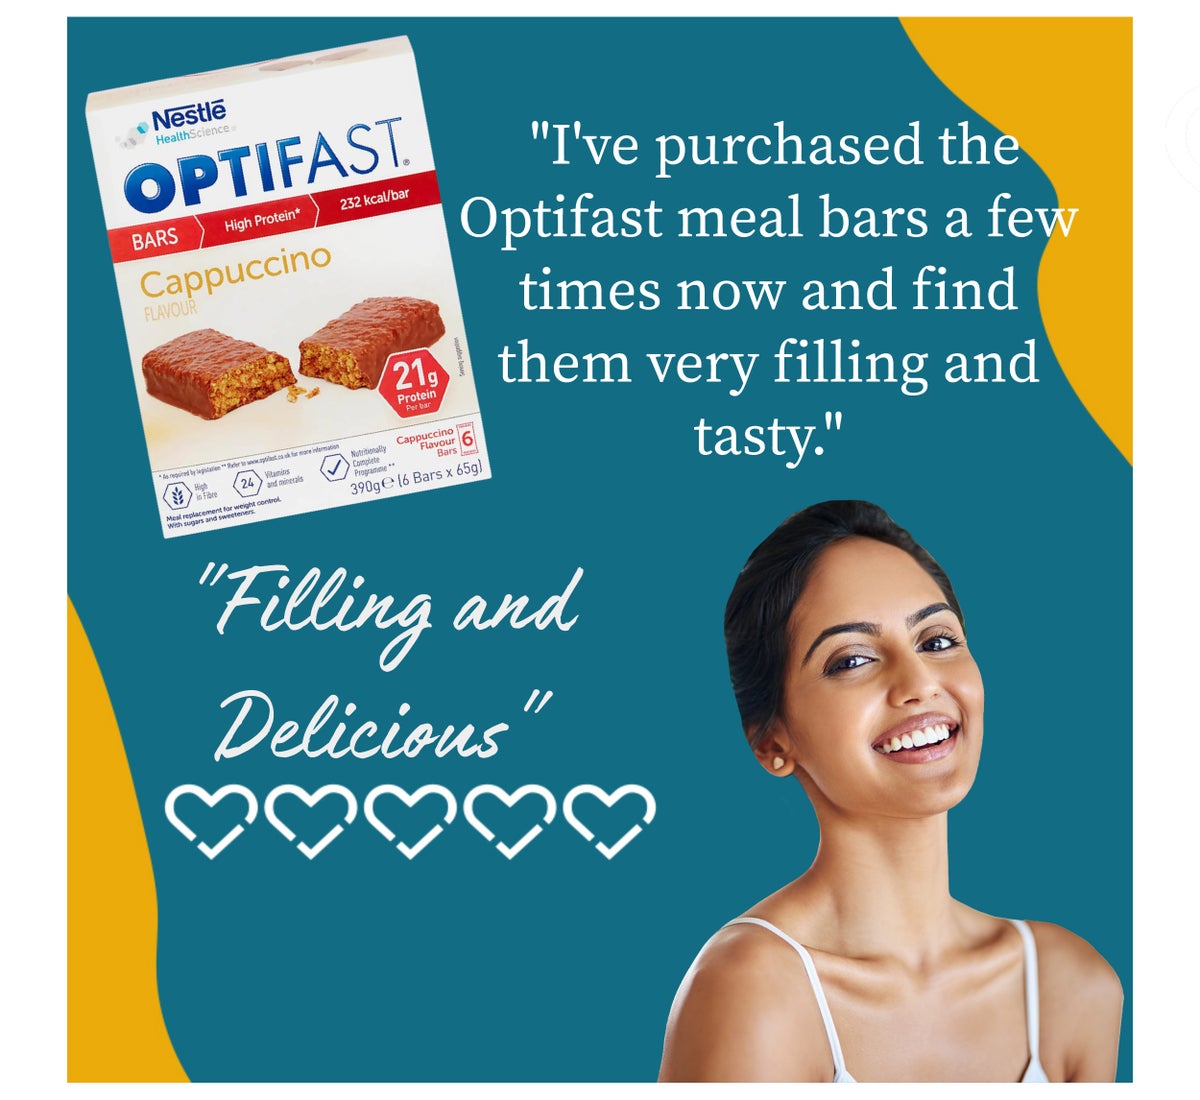 Filling and delicious. I've purchased the Optifast meal bars a few times now and find them very filling and tasty.